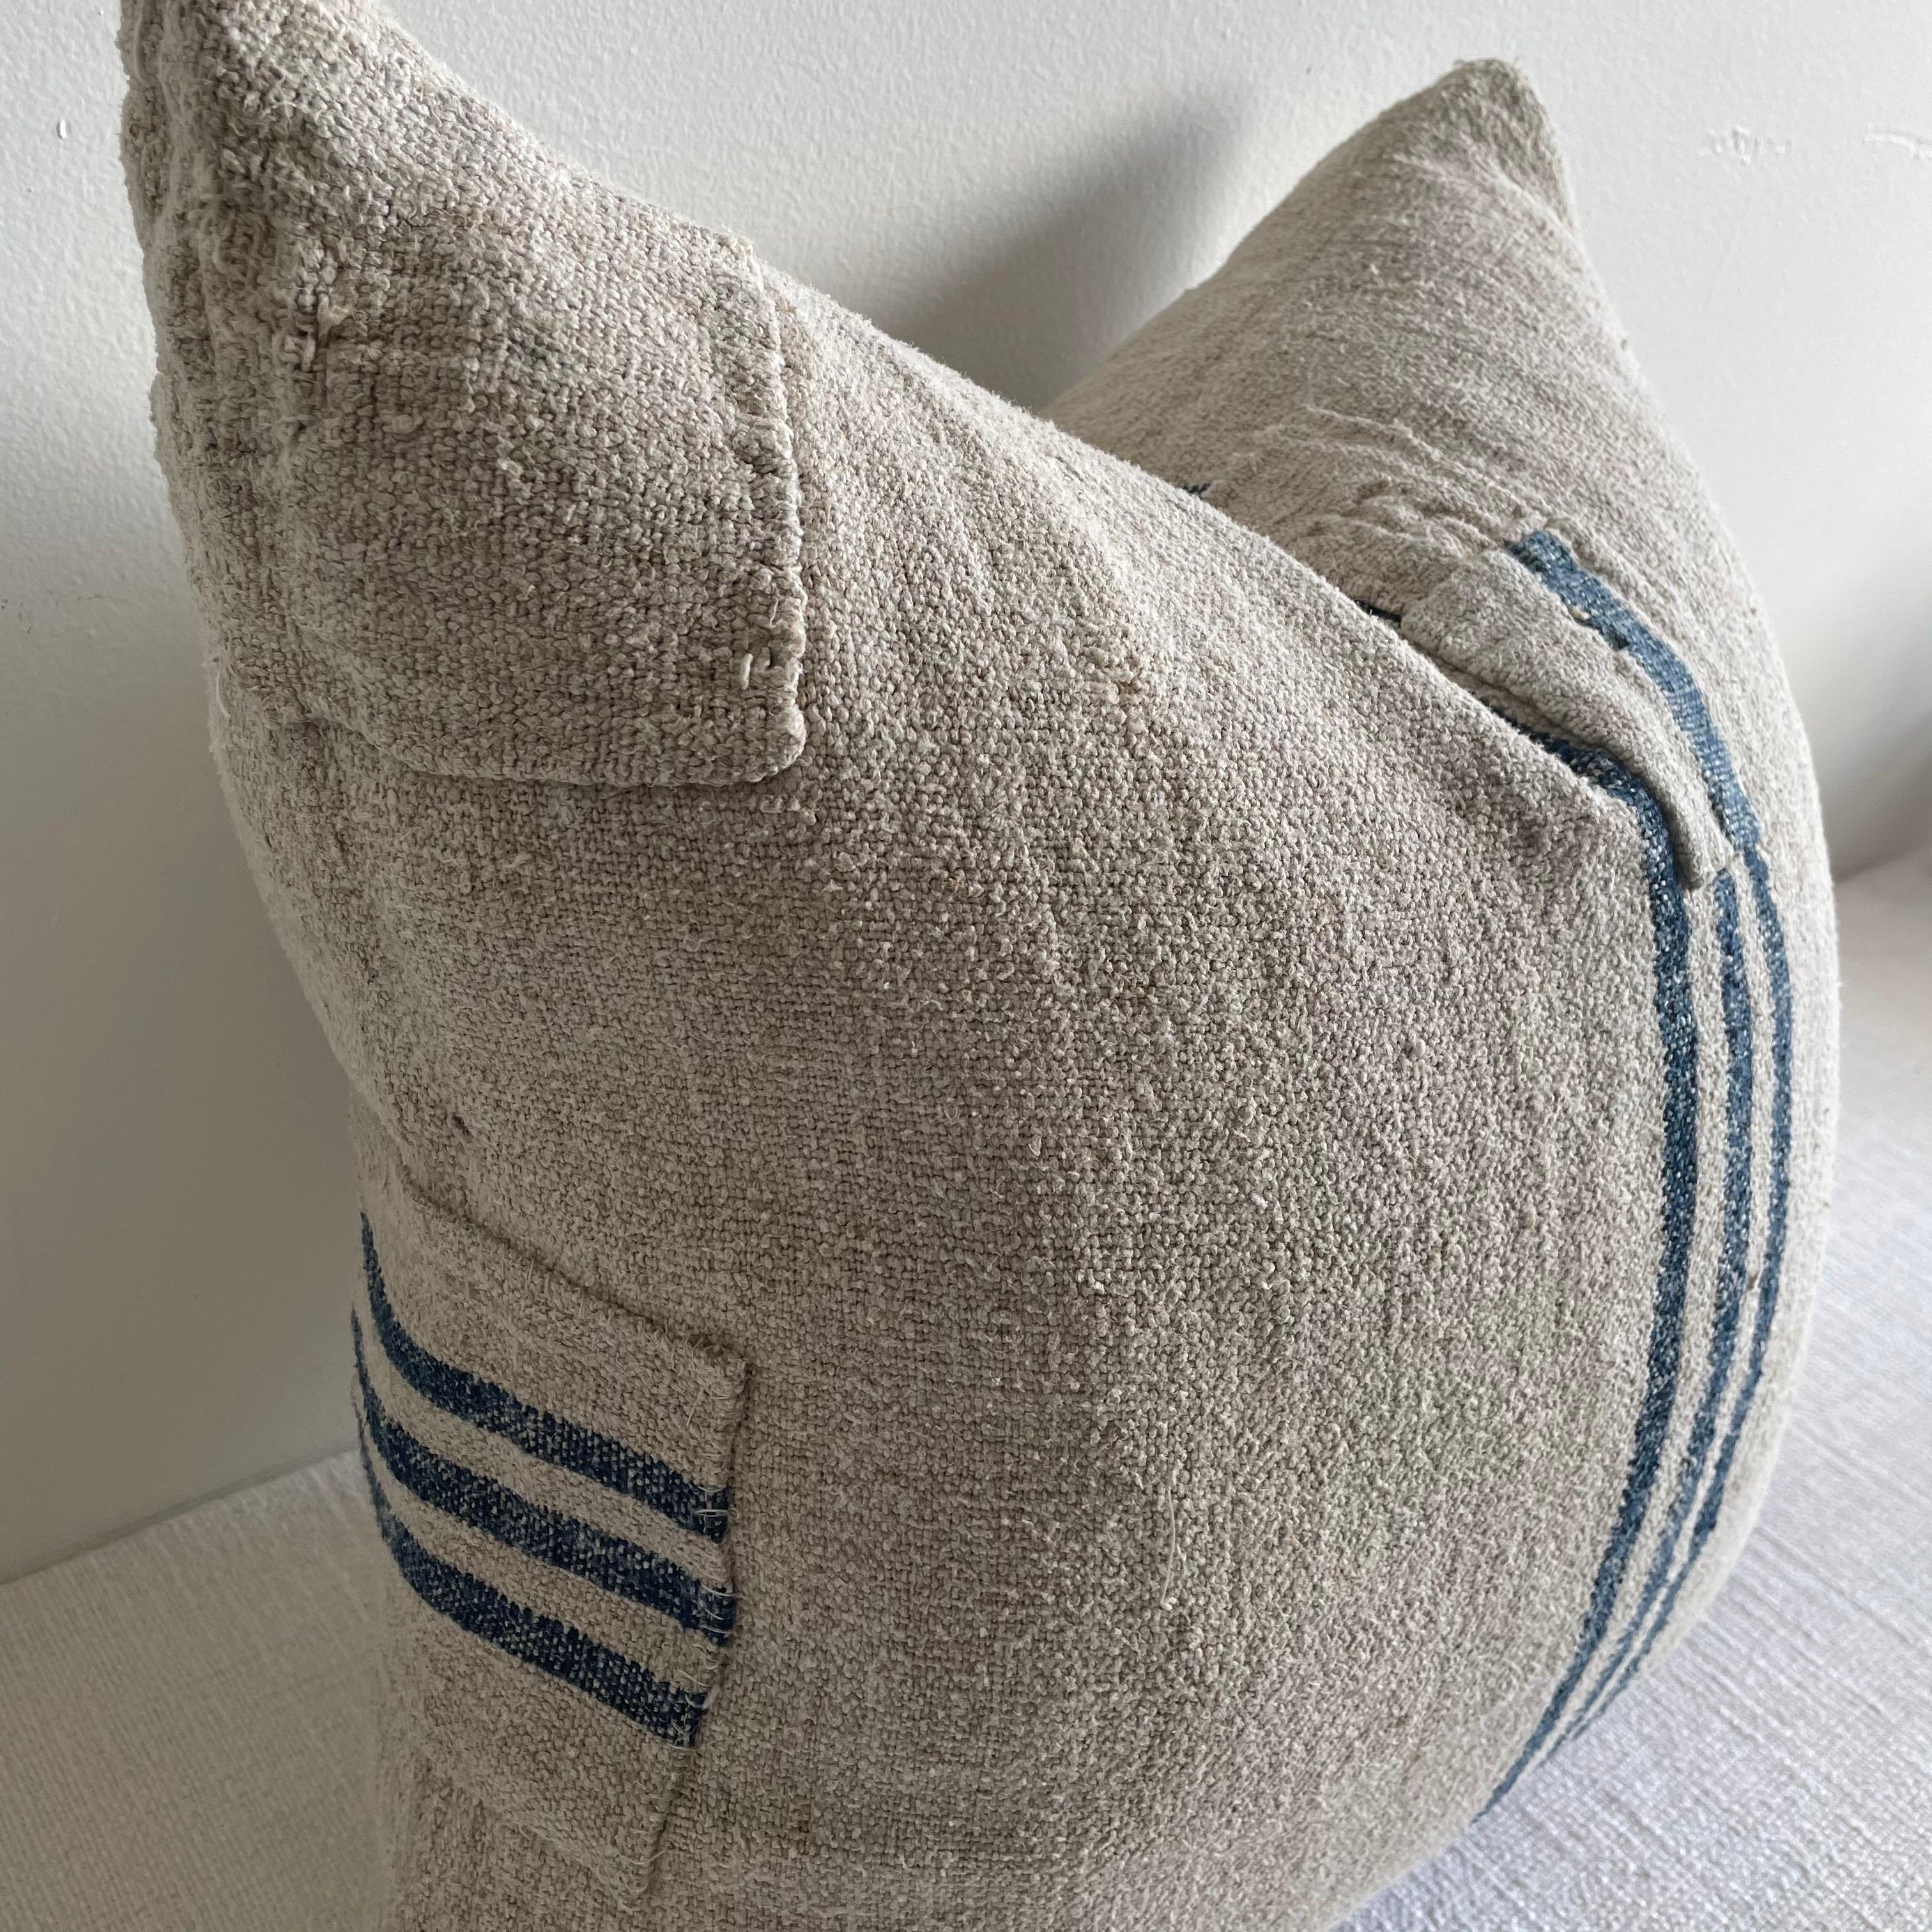 This vintage textile pillow is made from an antique European Grainsack with indigo stripe, natural nubby woven texture. Our pillows are constructed with vintage one of a kind textiles from around the globe. Carefully constructed with the finest